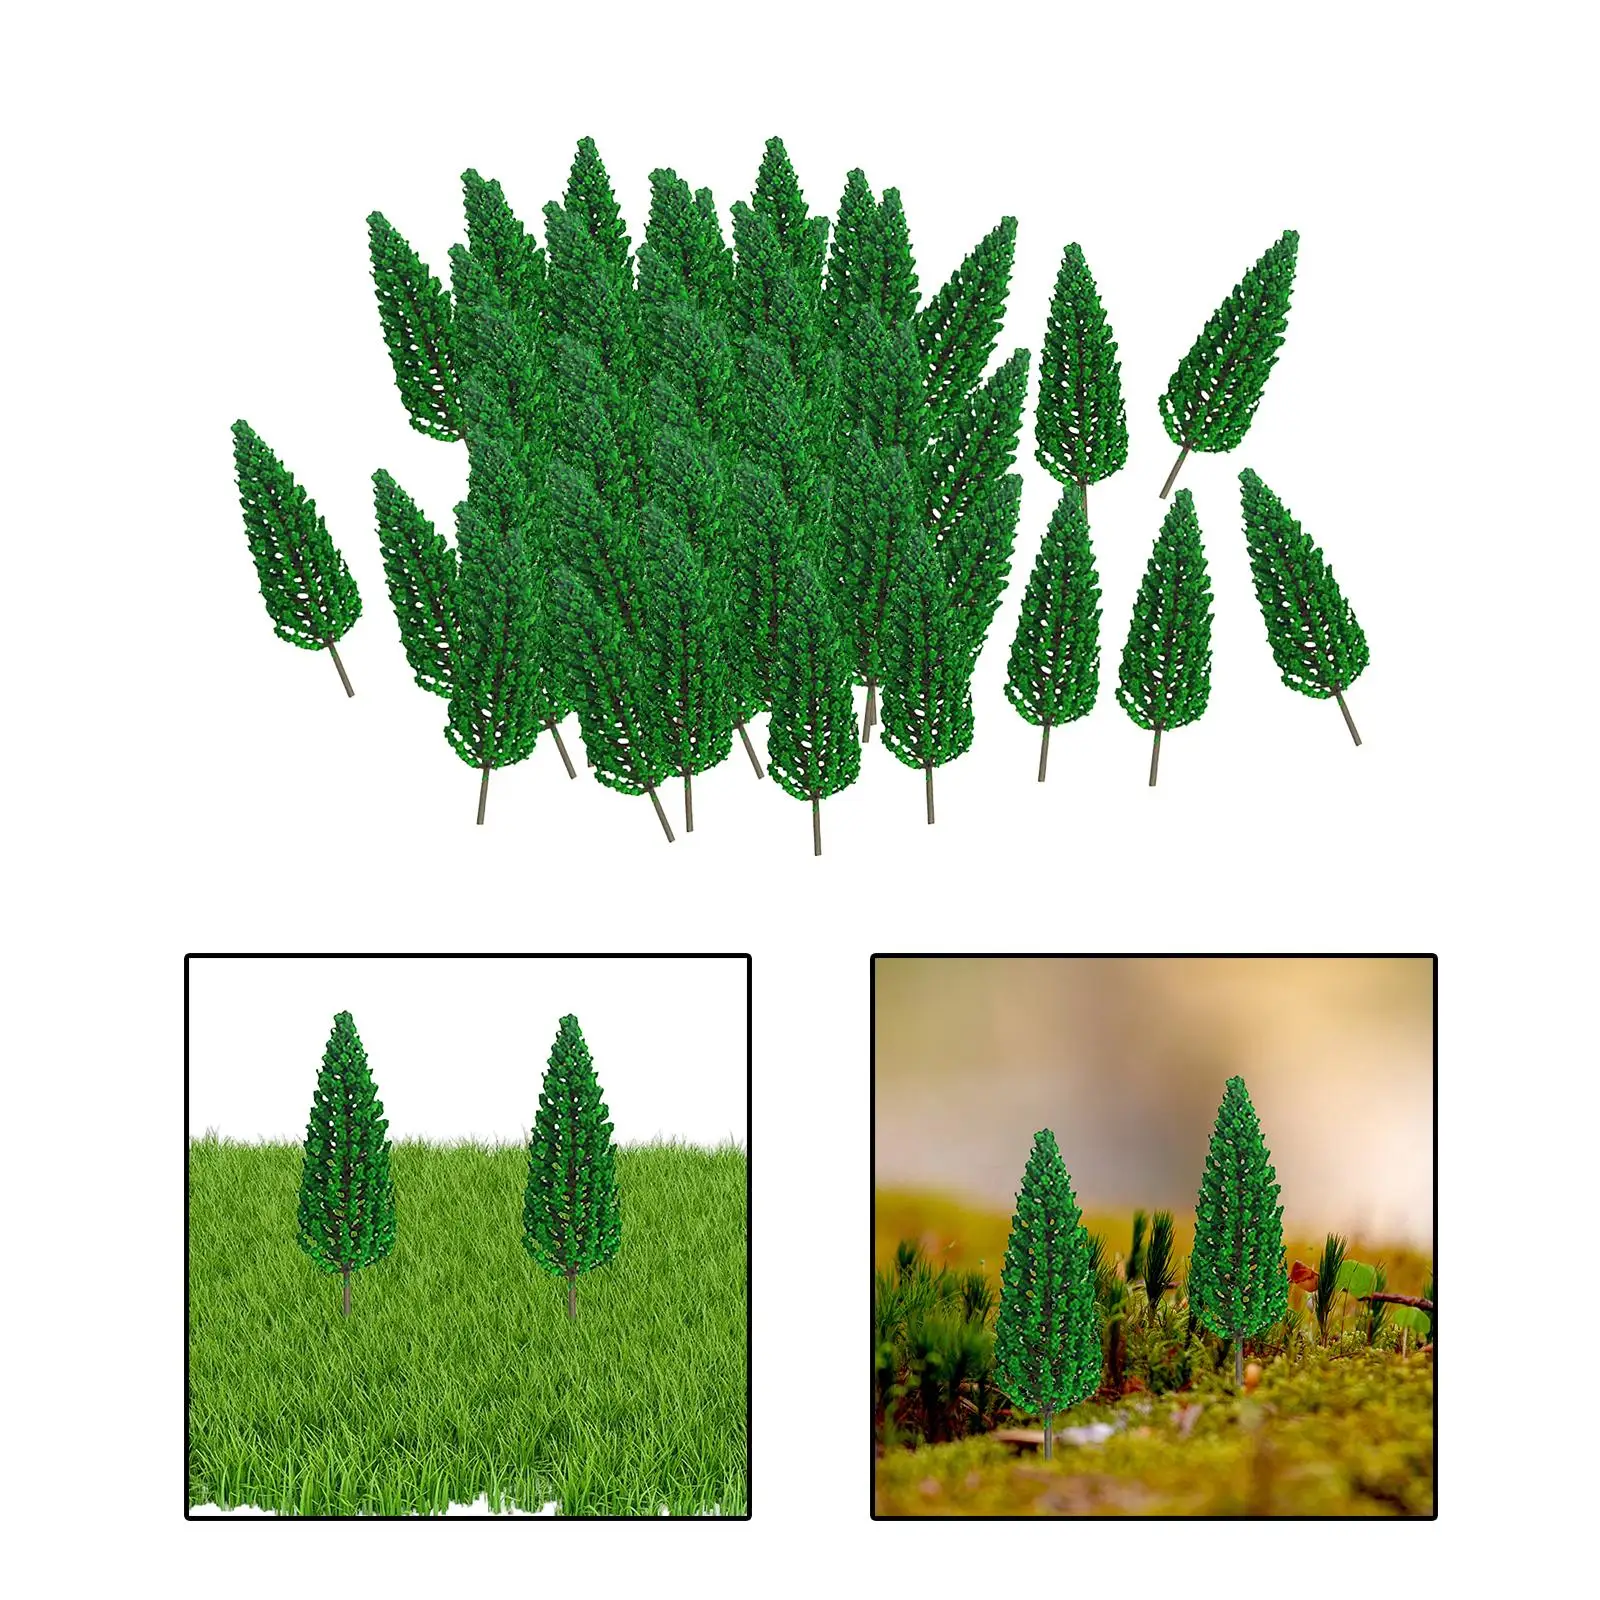 70 Pieces Scenery Tree 6cm Miniature Landscape Trees Diorama Tree Model Trees for DIY Crafts Railroad Scenery Layout Accessories